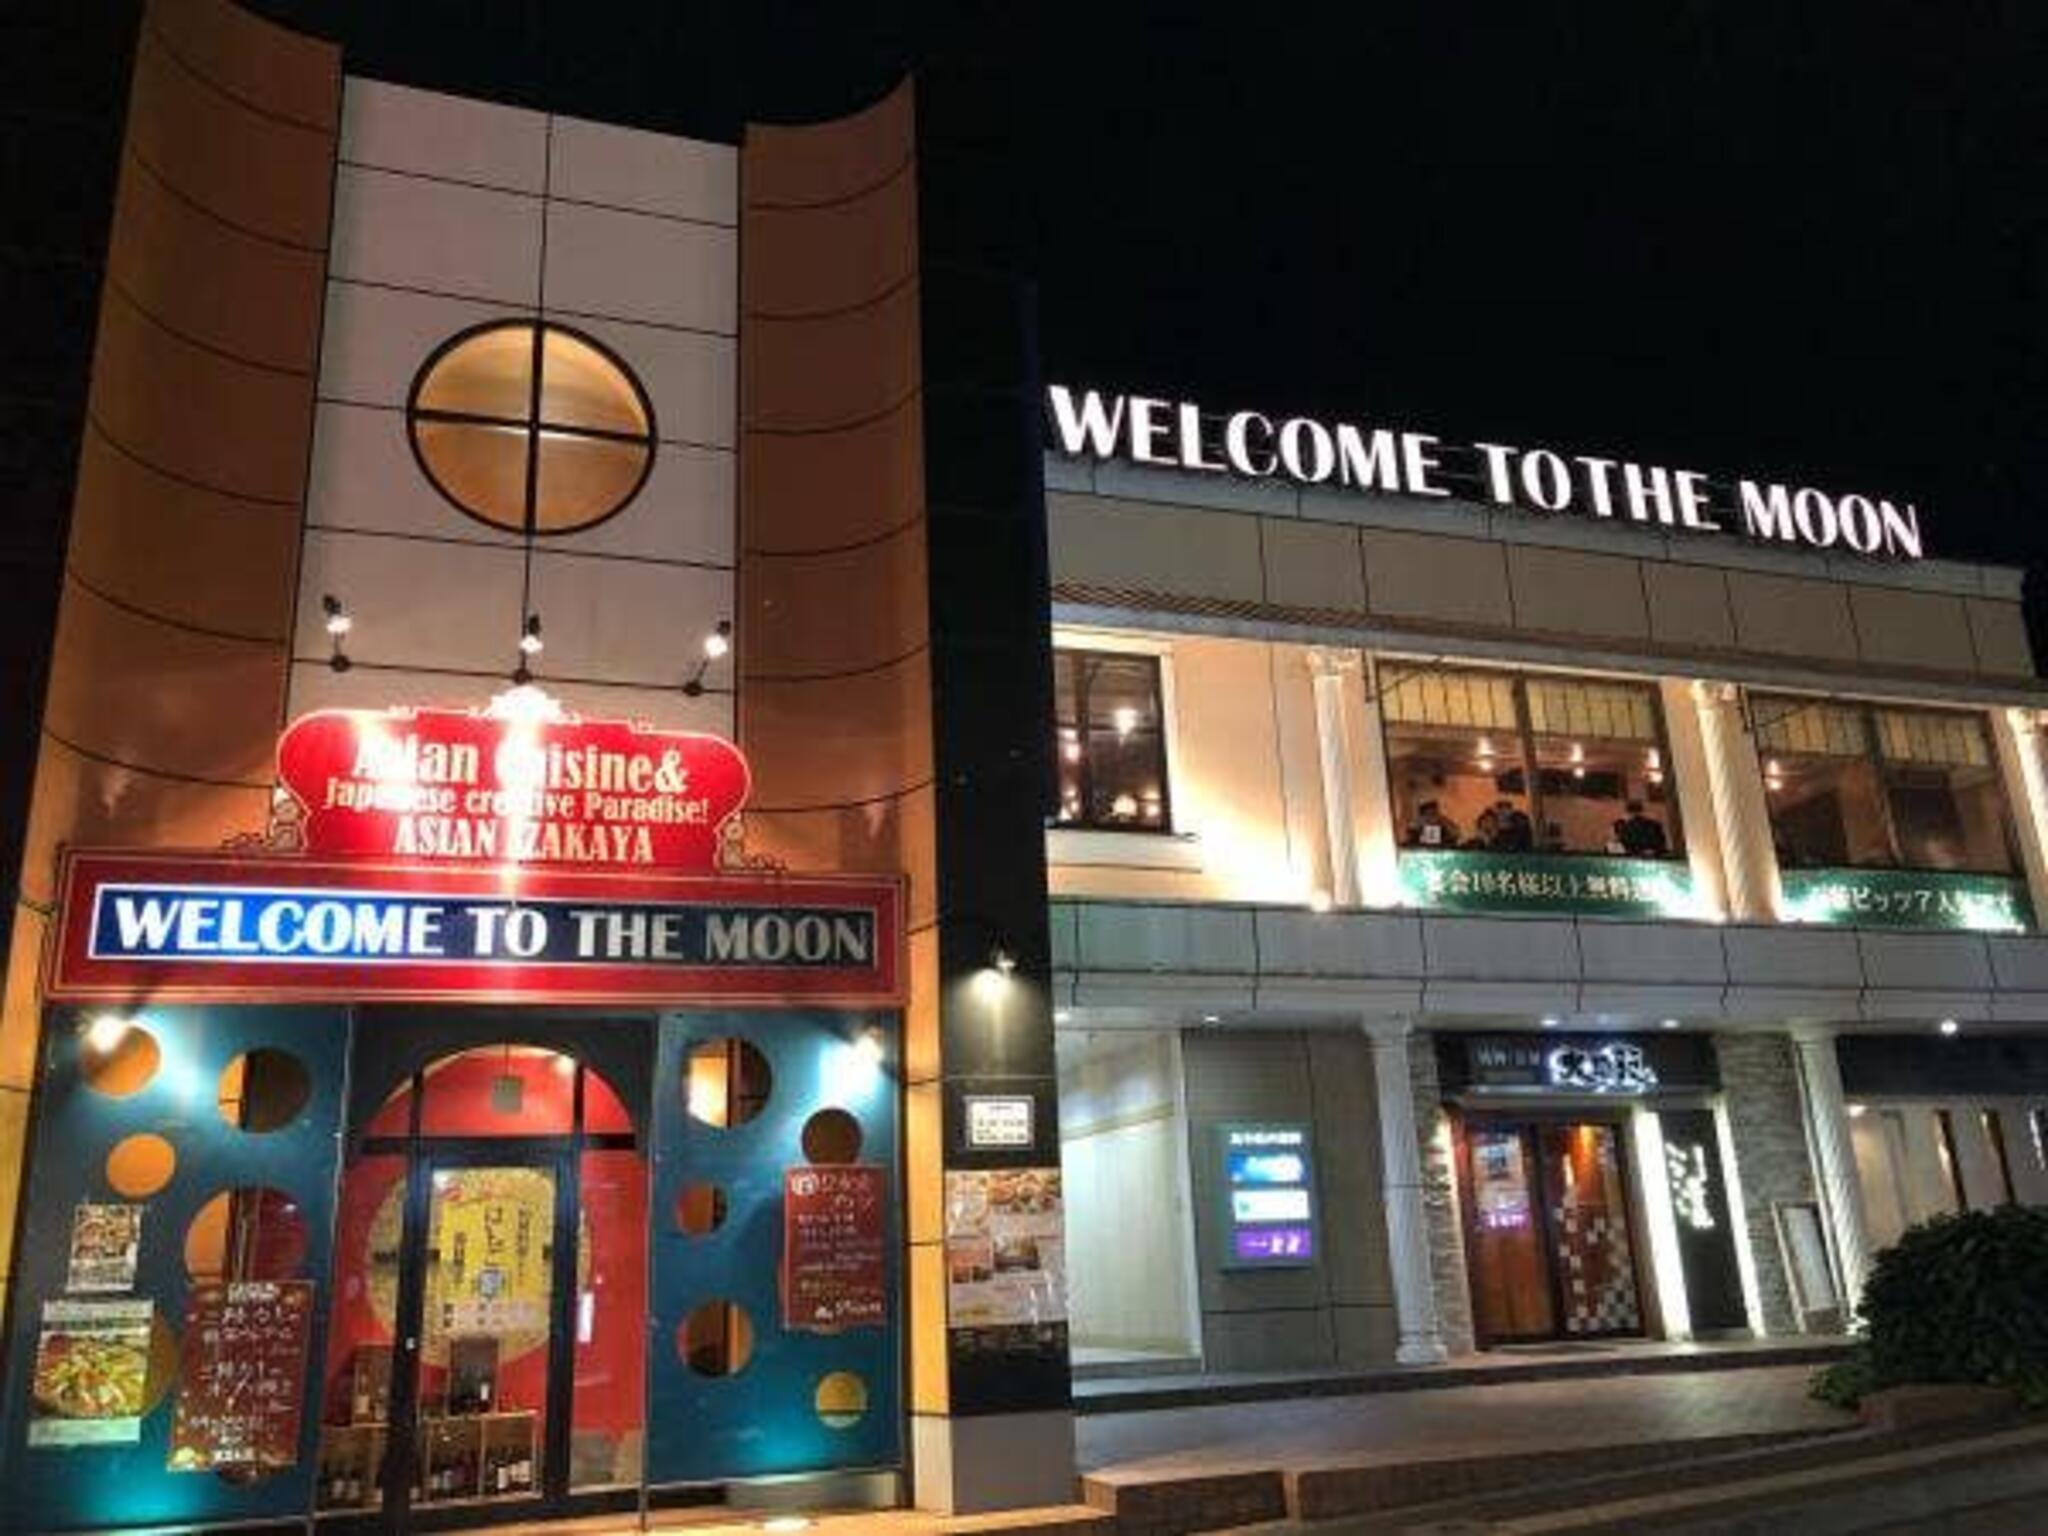 Welcome to the Moonの代表写真7